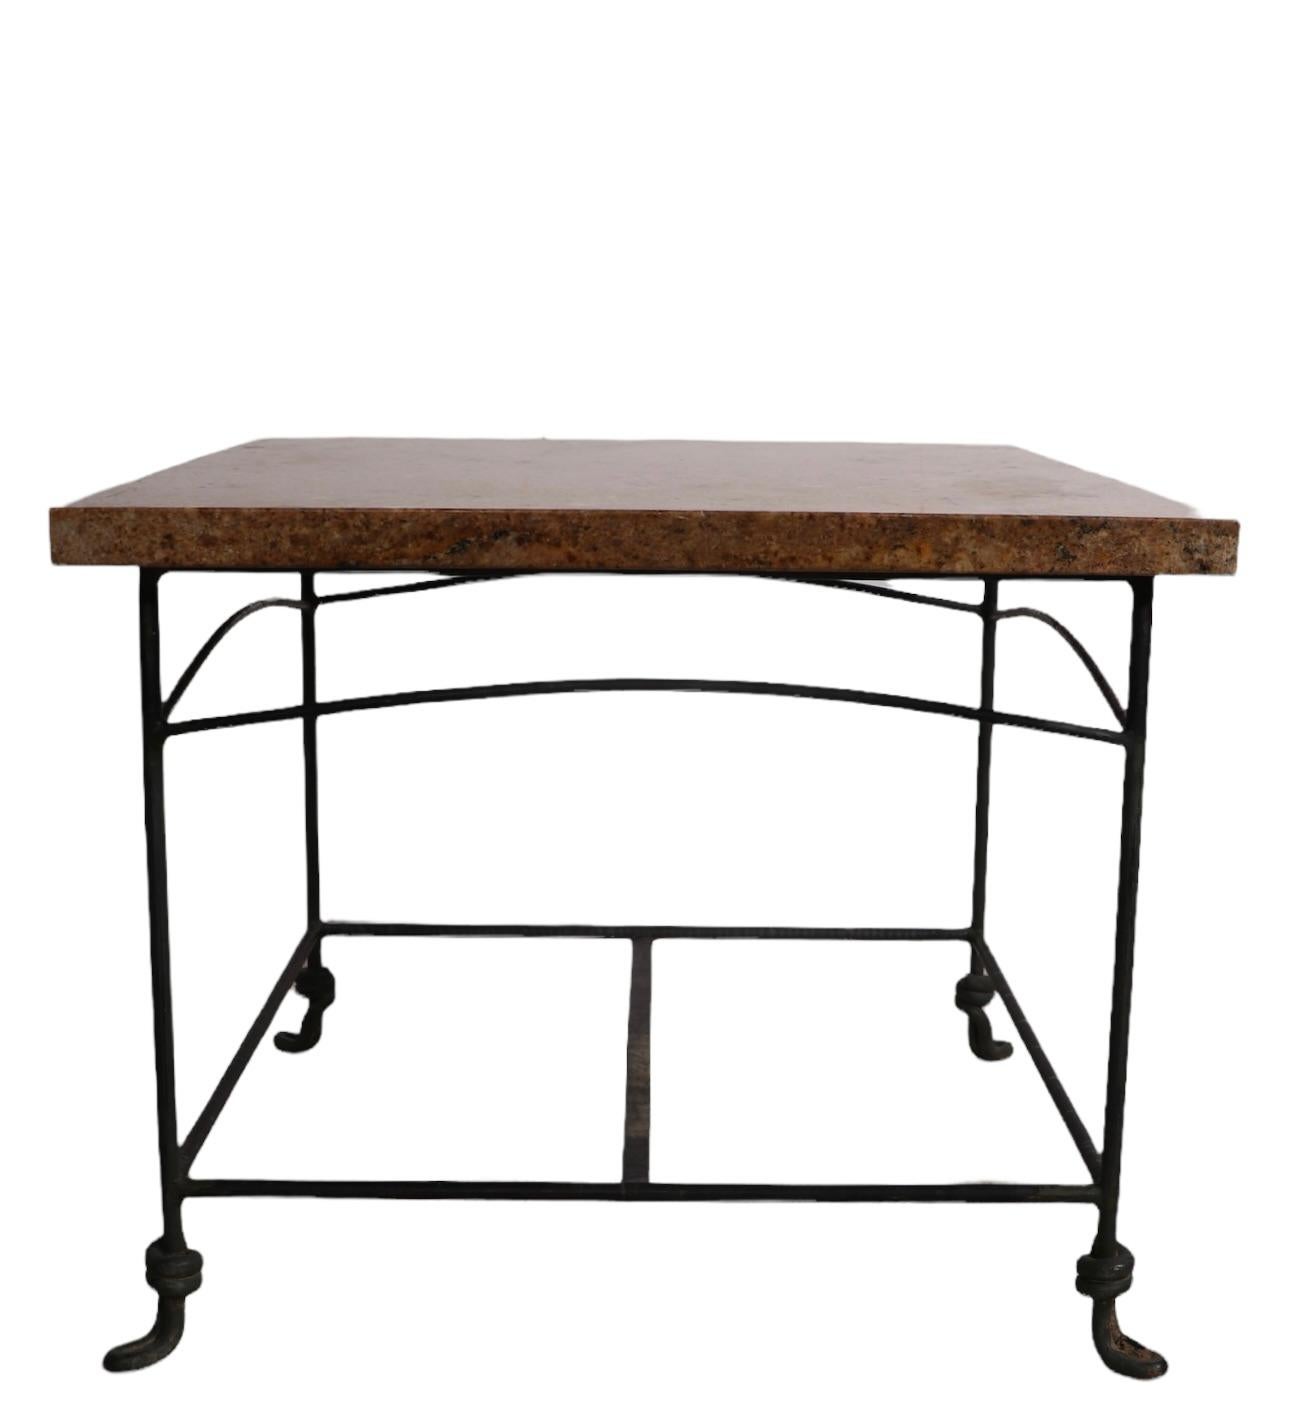 Pr. Wrought Iron Garden Patio End Tables with Polished Granite Tops 6